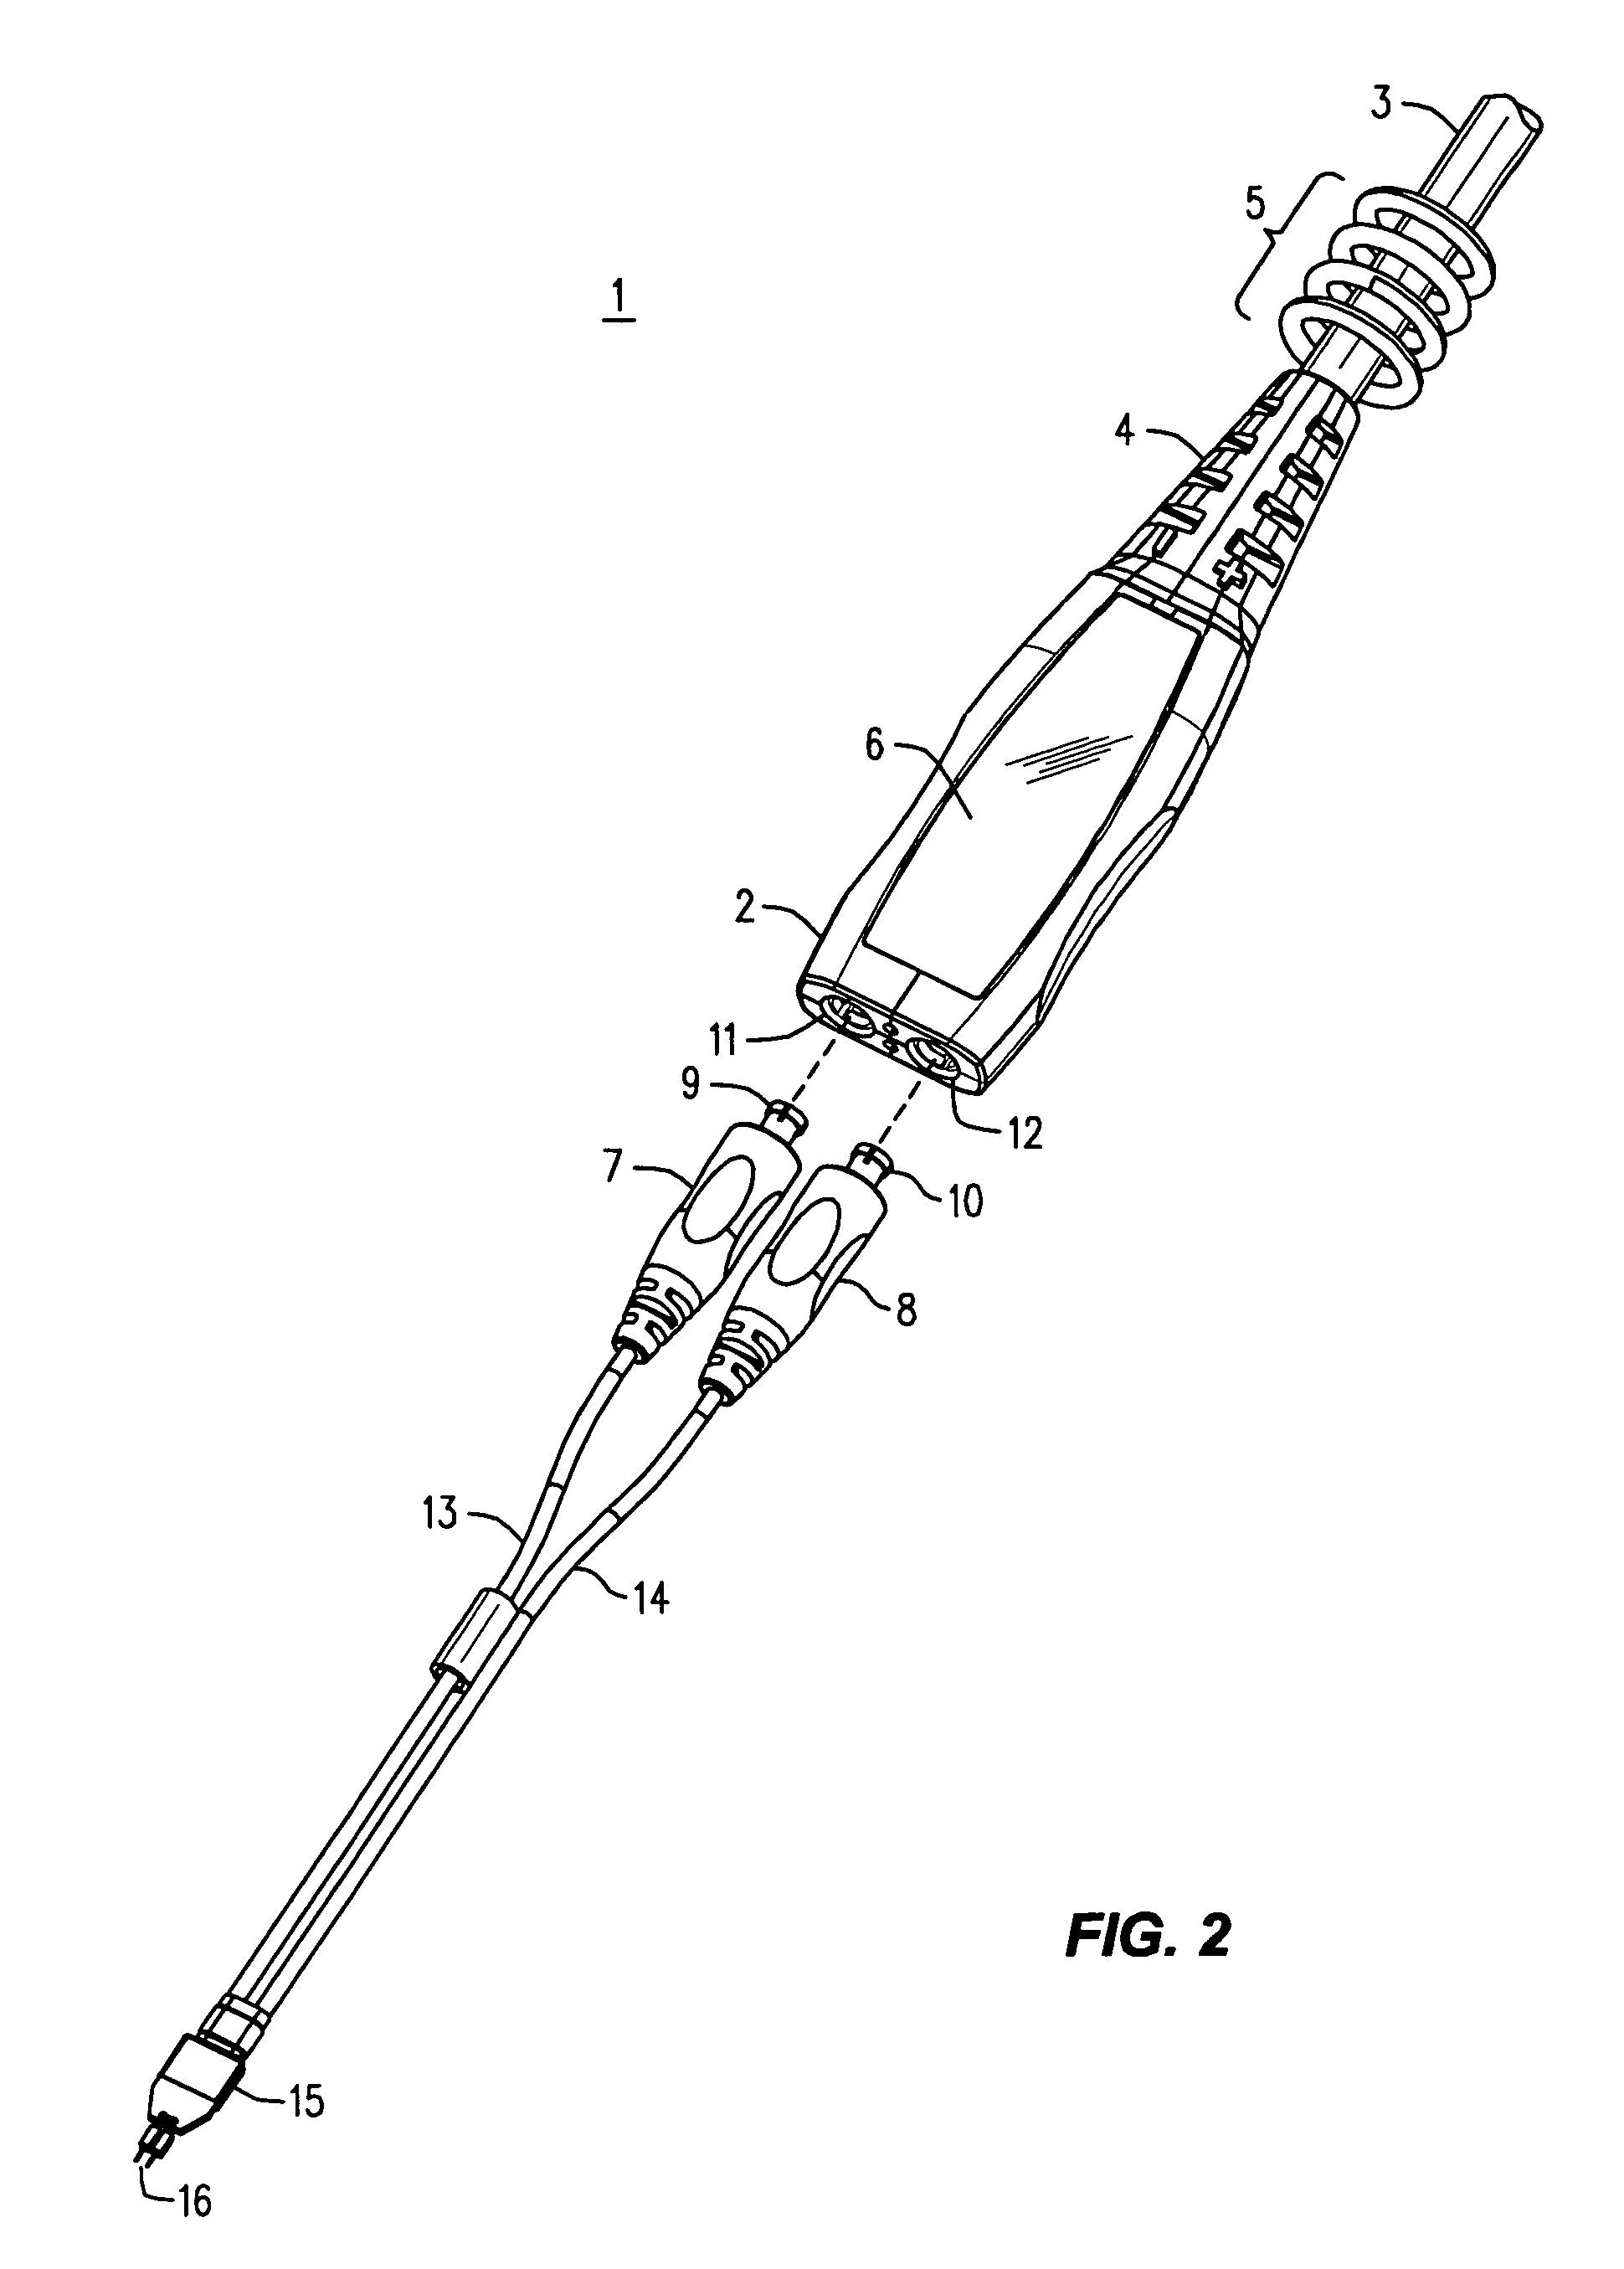 Housing for a thin active probe